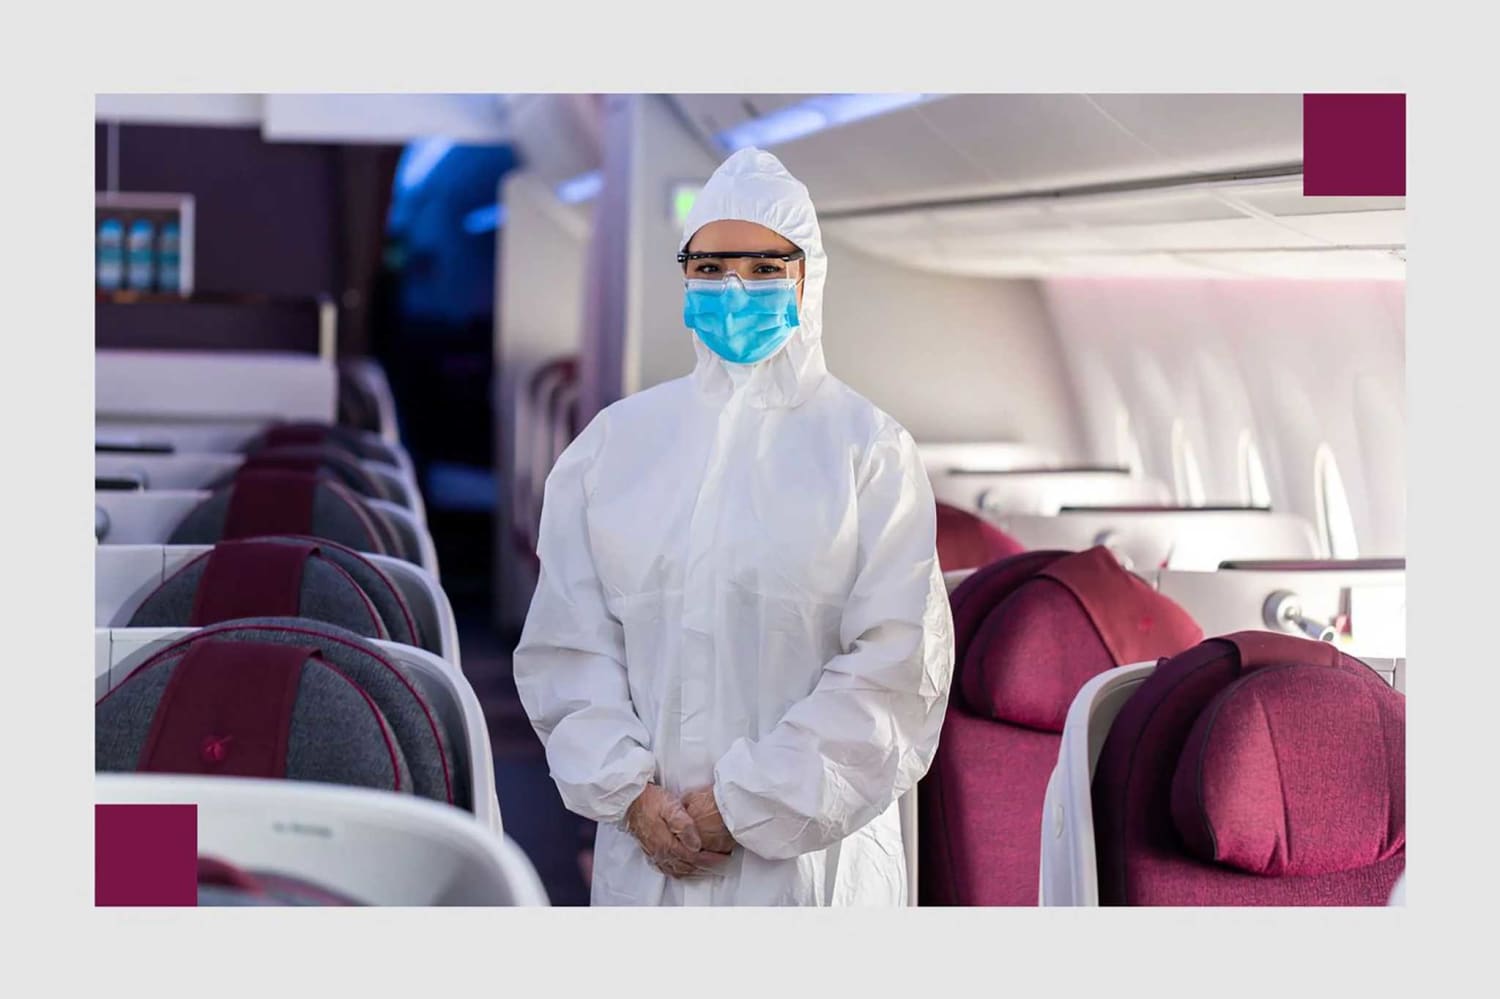 People are wearing hazmat suits on planes, but should they?